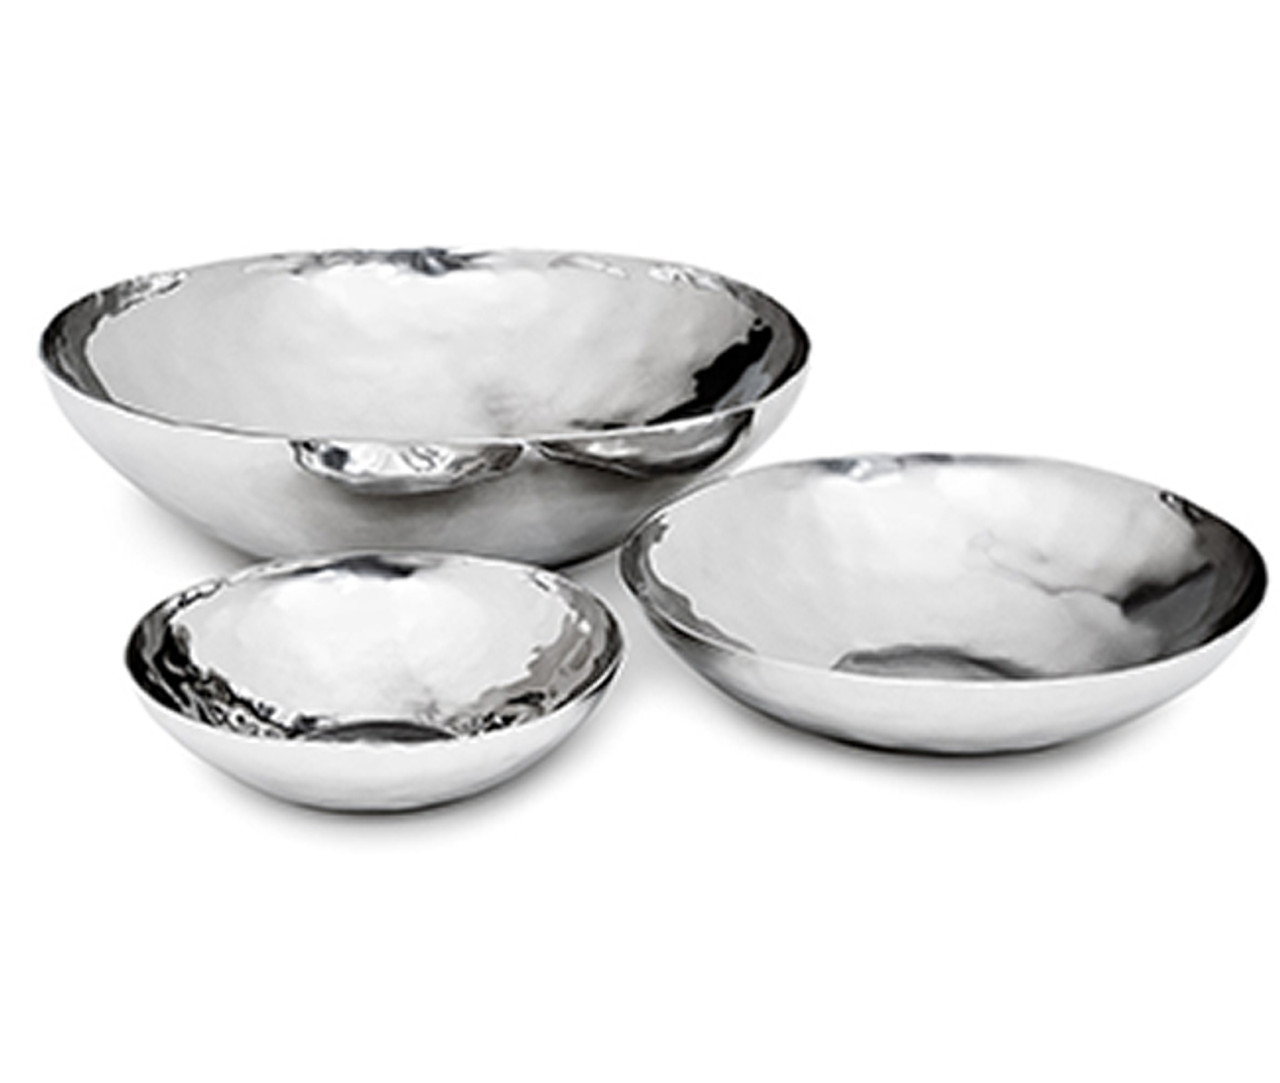 https://cdn11.bigcommerce.com/s-e0xlh4avpe/images/stencil/1280x1280/products/103563/136956/mary-jurek-luna-6-round-serving-bowl-stainless-steel-26__49496.1650937185.jpg?c=1